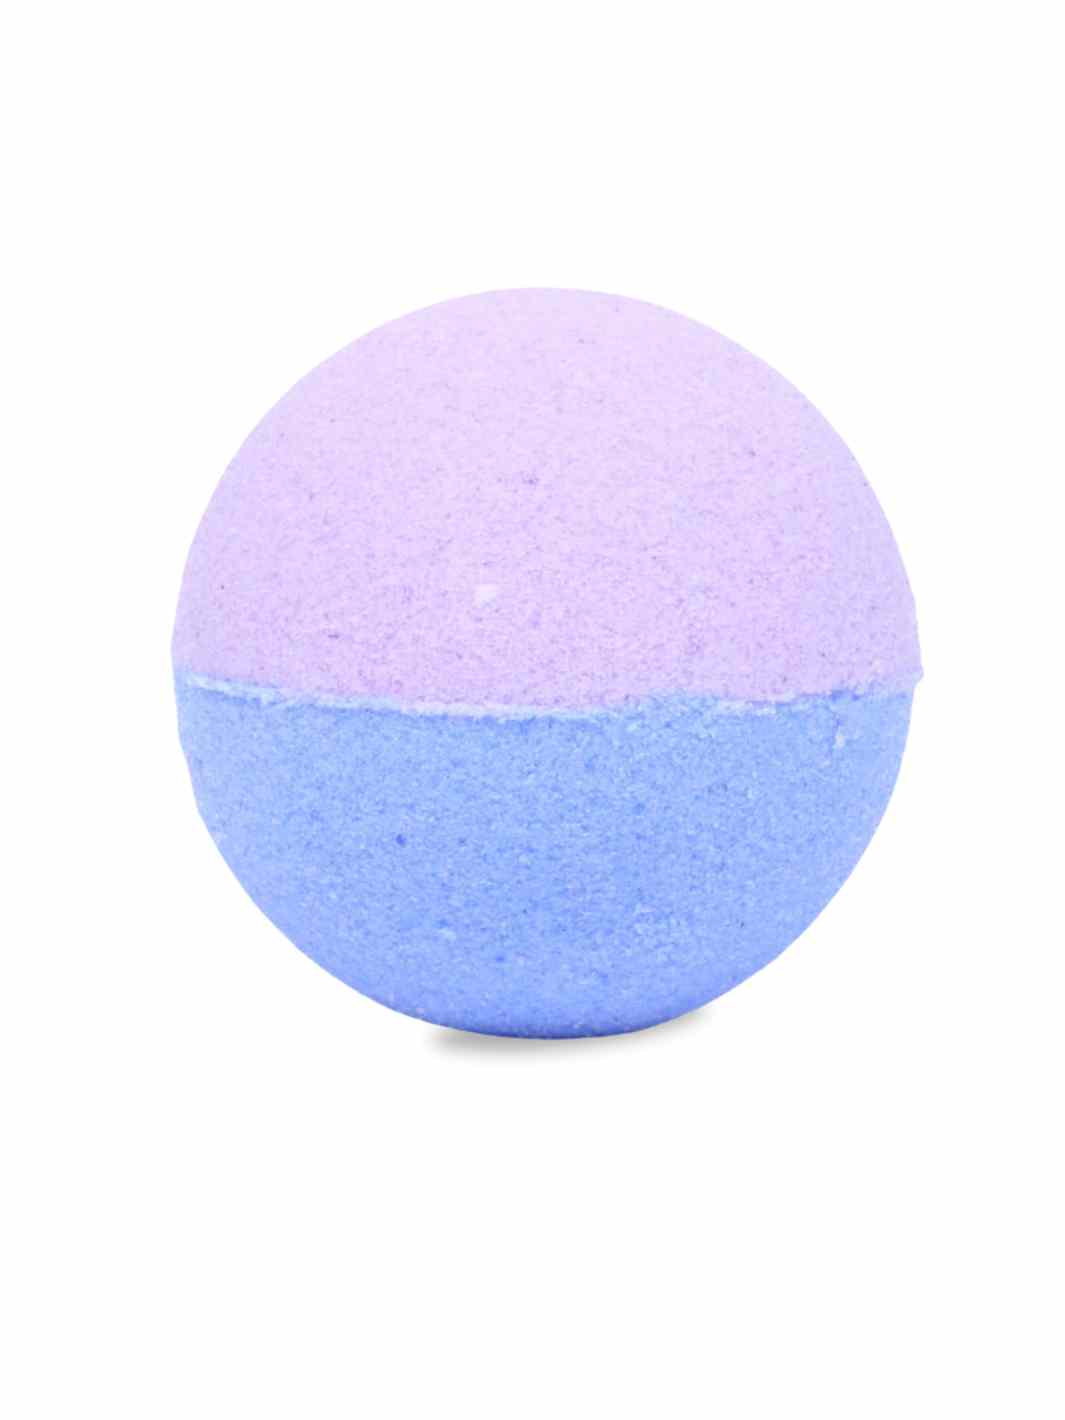 Good Soul Shop Sweet Dreams bath bomb scented with vanilla lavender and chamomile essential oils